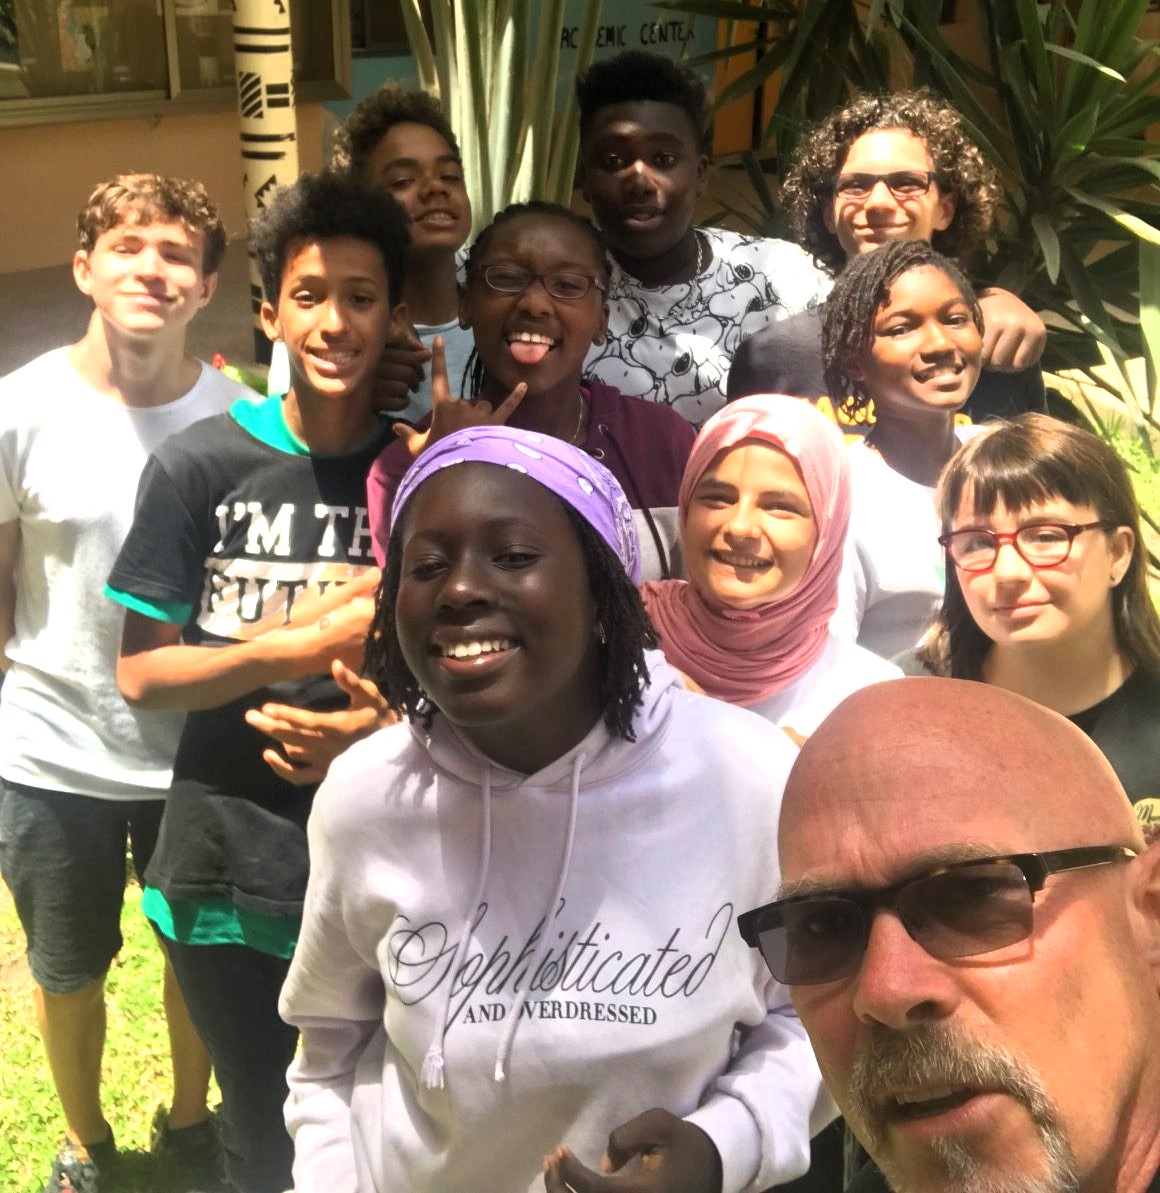 While teaching at the International School of Dakar school in Senegal, Mr. Johnson enjoys time outside with his students. Photo courtesy of Mr. Johnson